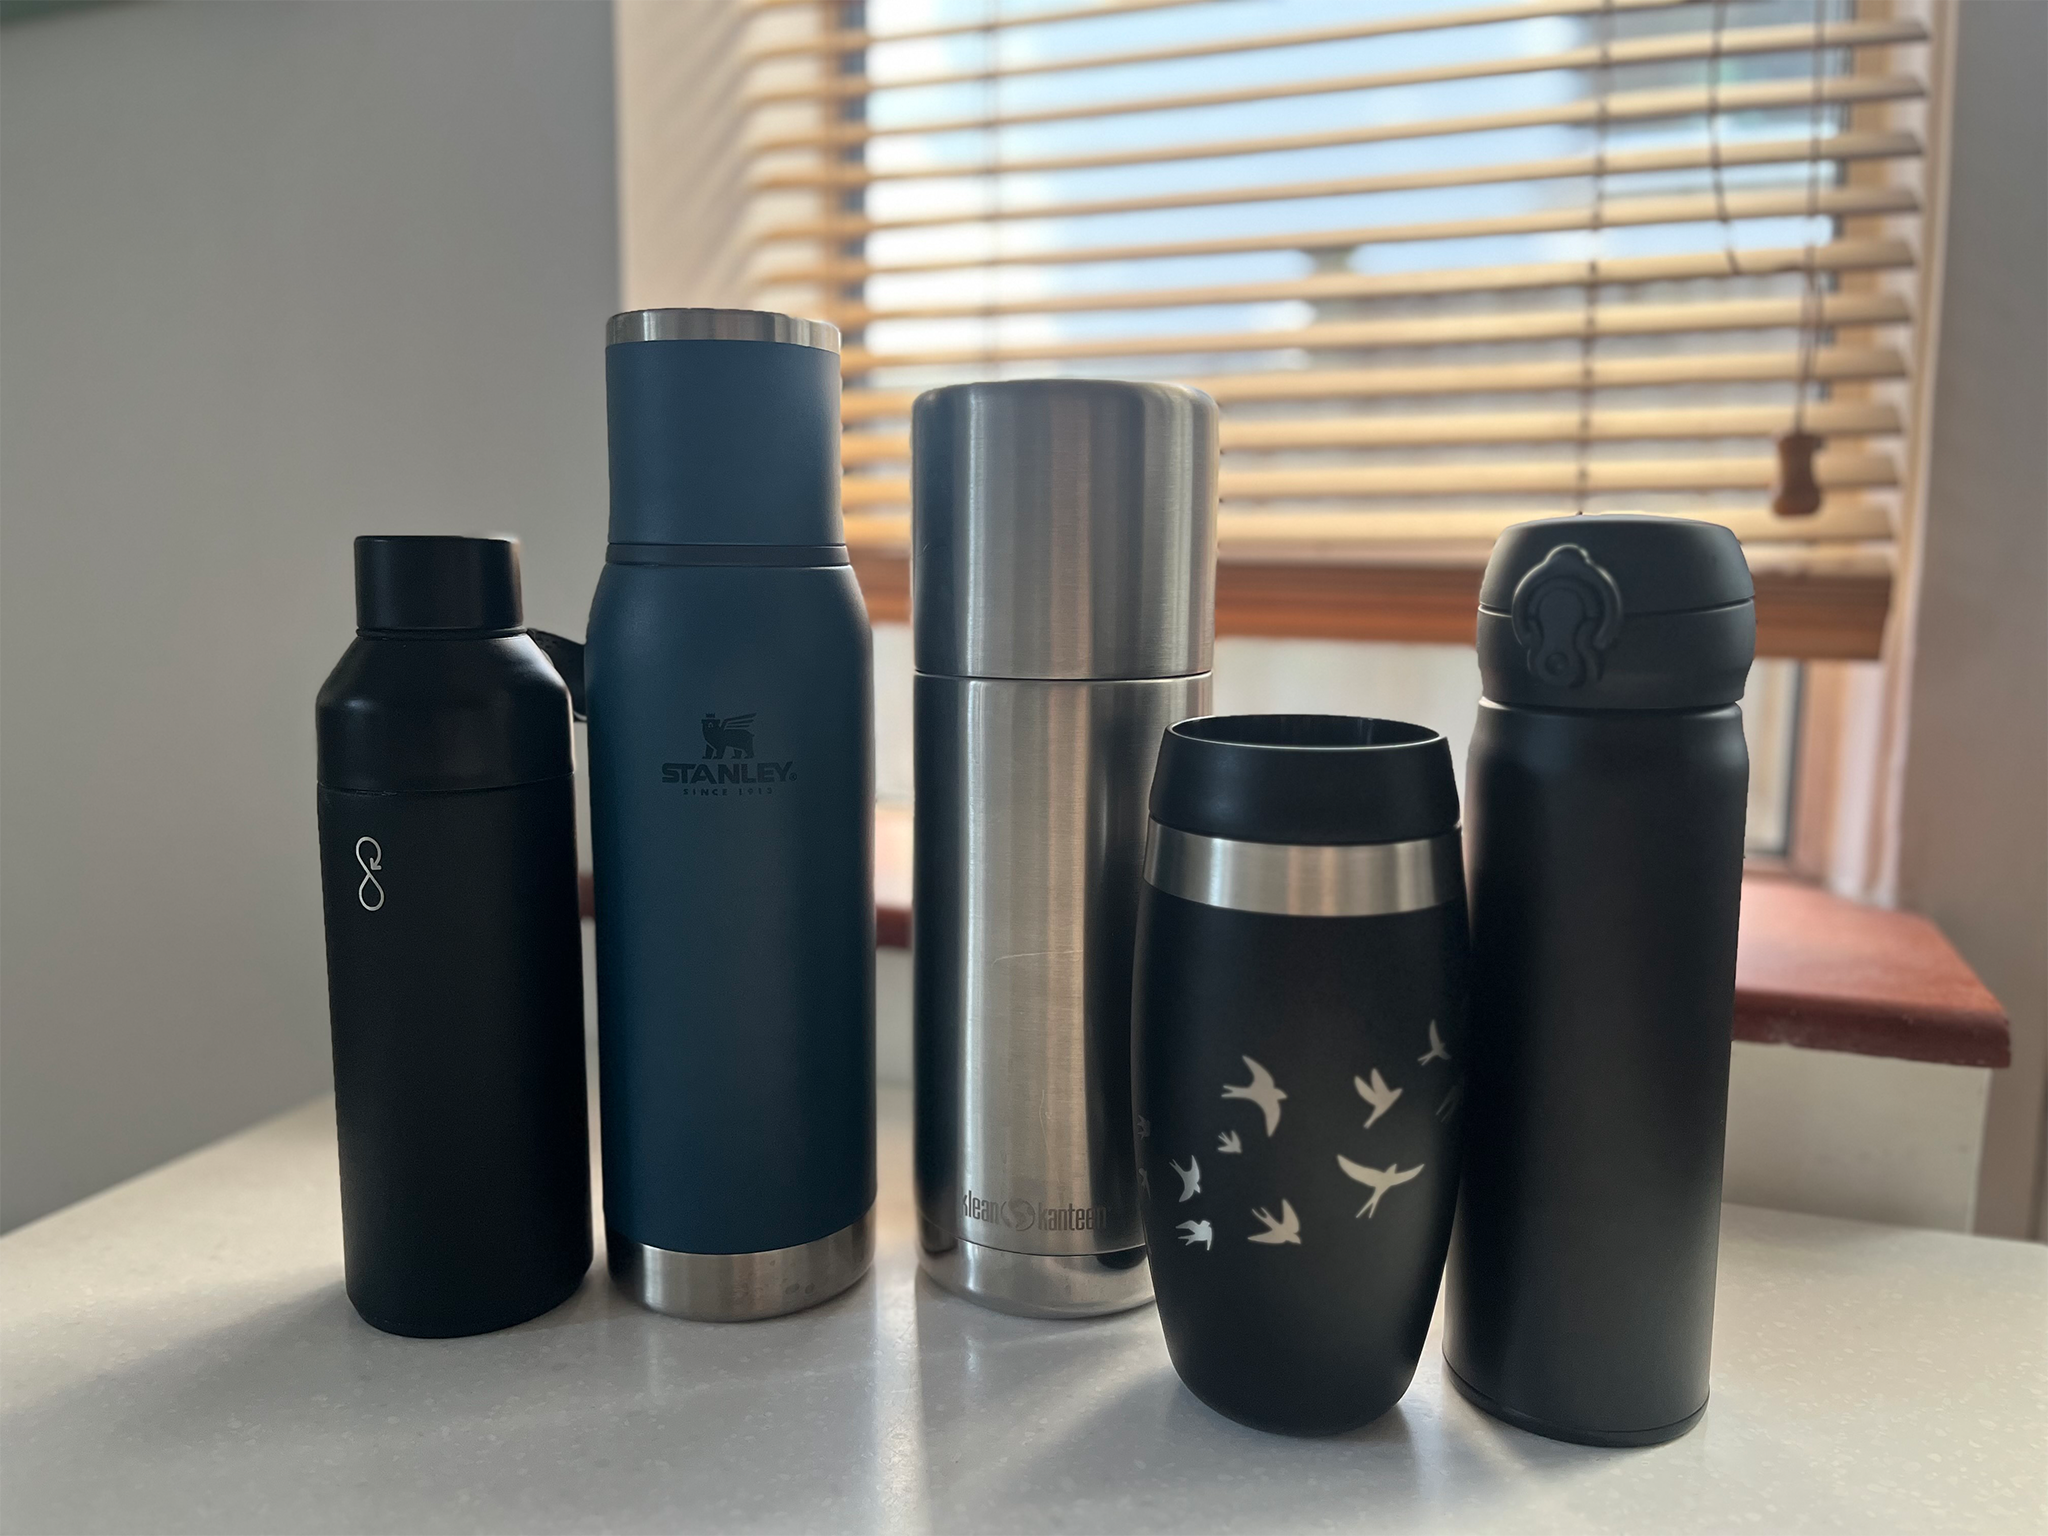 A selection of the best flasks that we tested for this review